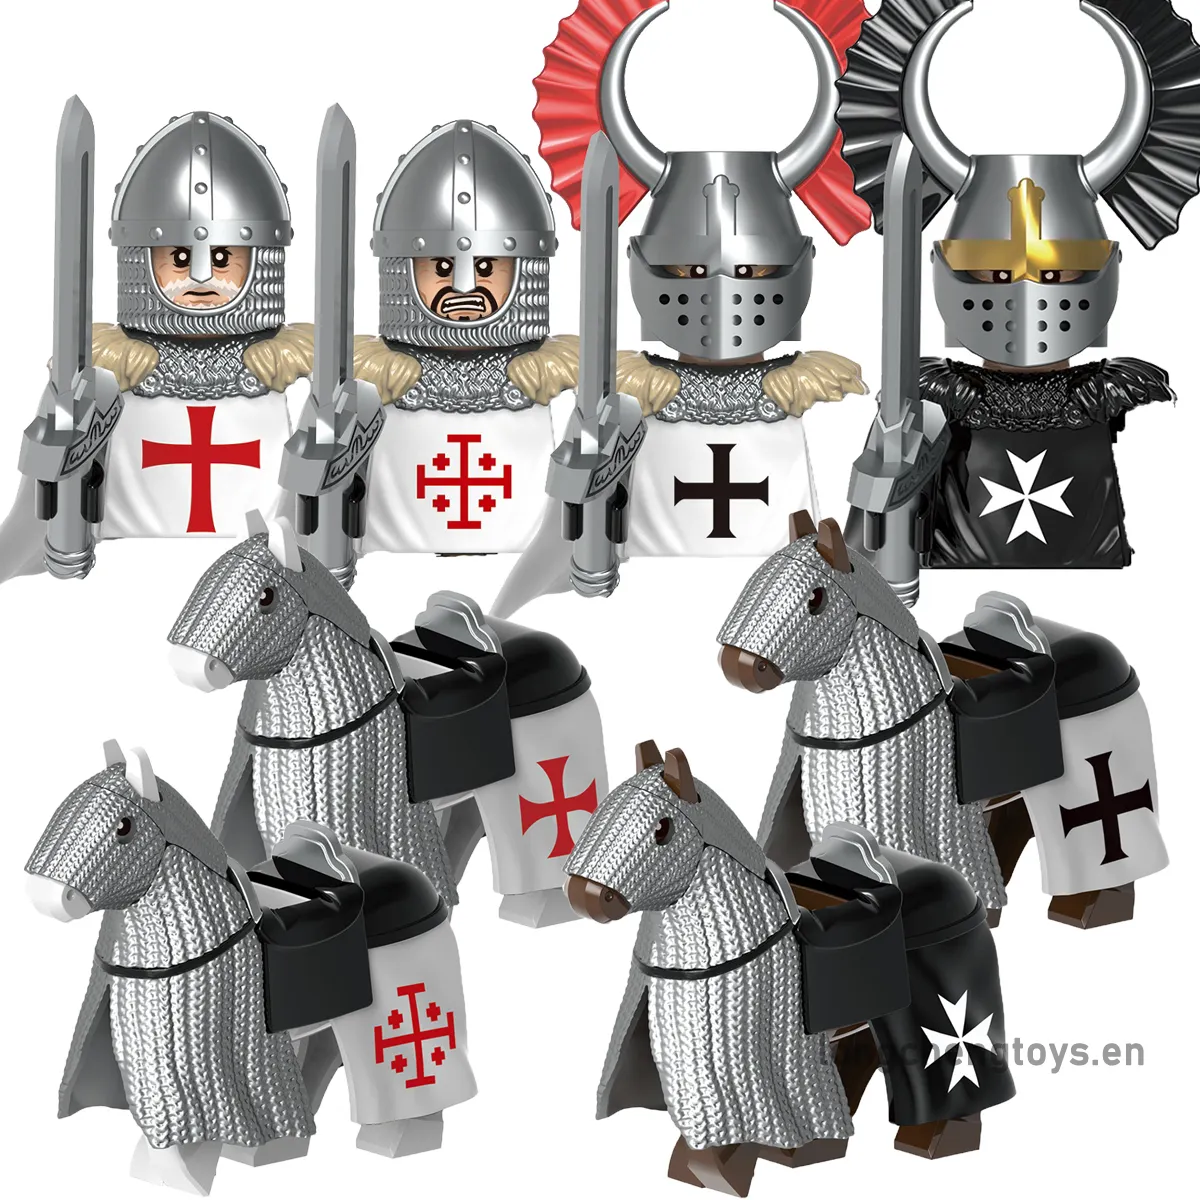 Medieval Soldiers Military Teutonic Knights Hospitaller War Horse Mini Character Building Block Figures For Children Toys G0128